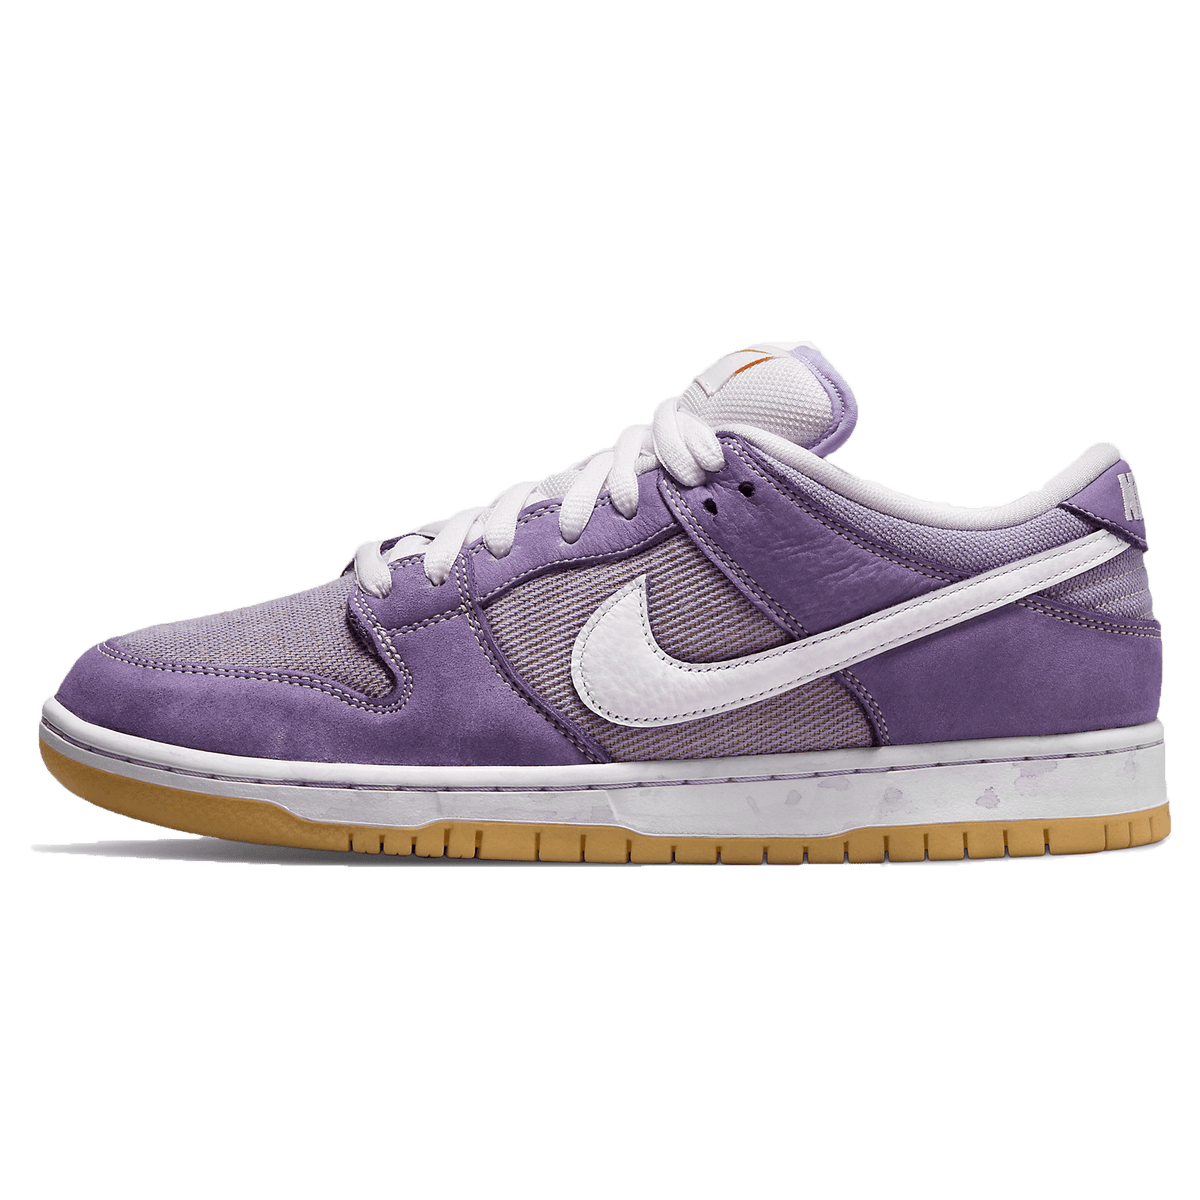 Nike hoodies Dunk Low SB 'Unbleached Pack - Lilac' - CerbeShops